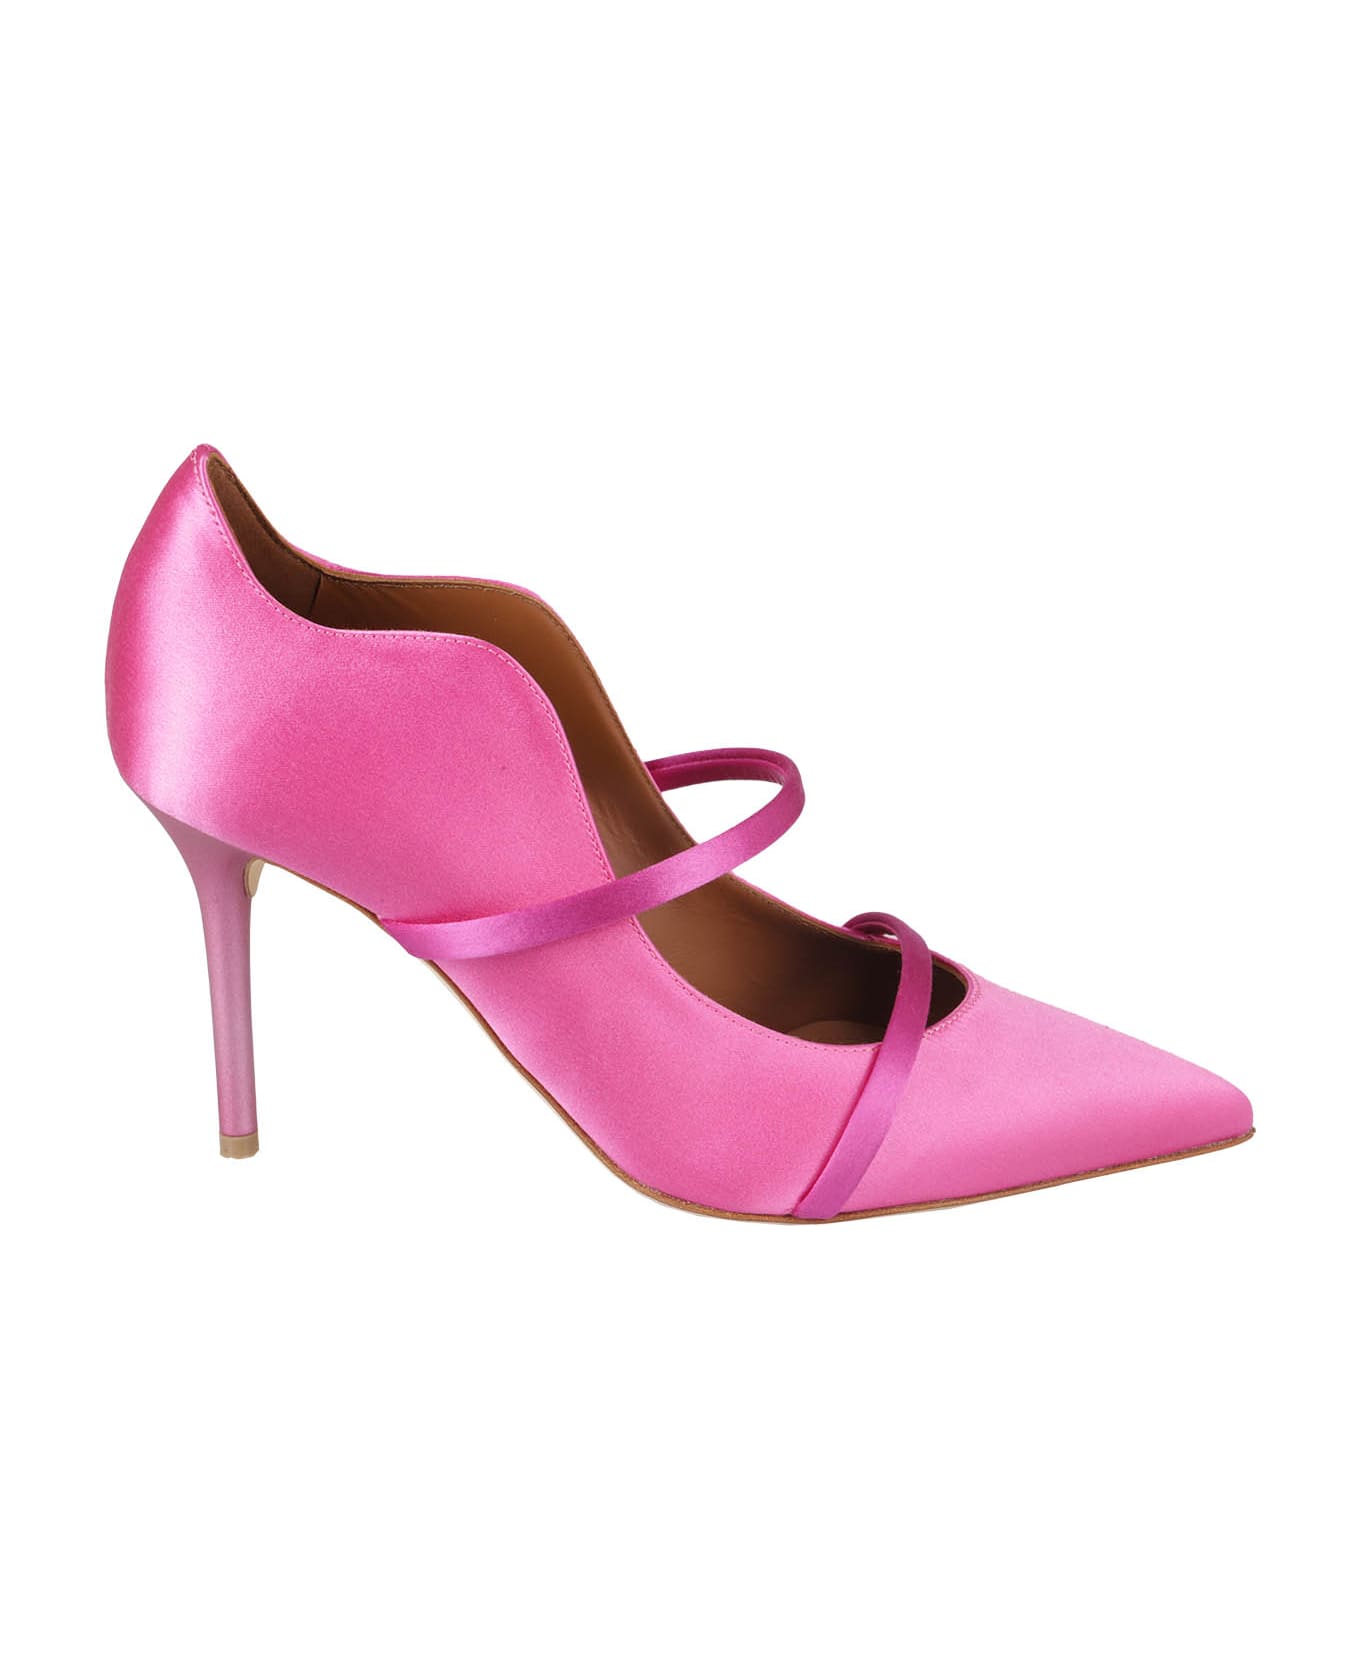 Malone Souliers Satin - Pink Berry